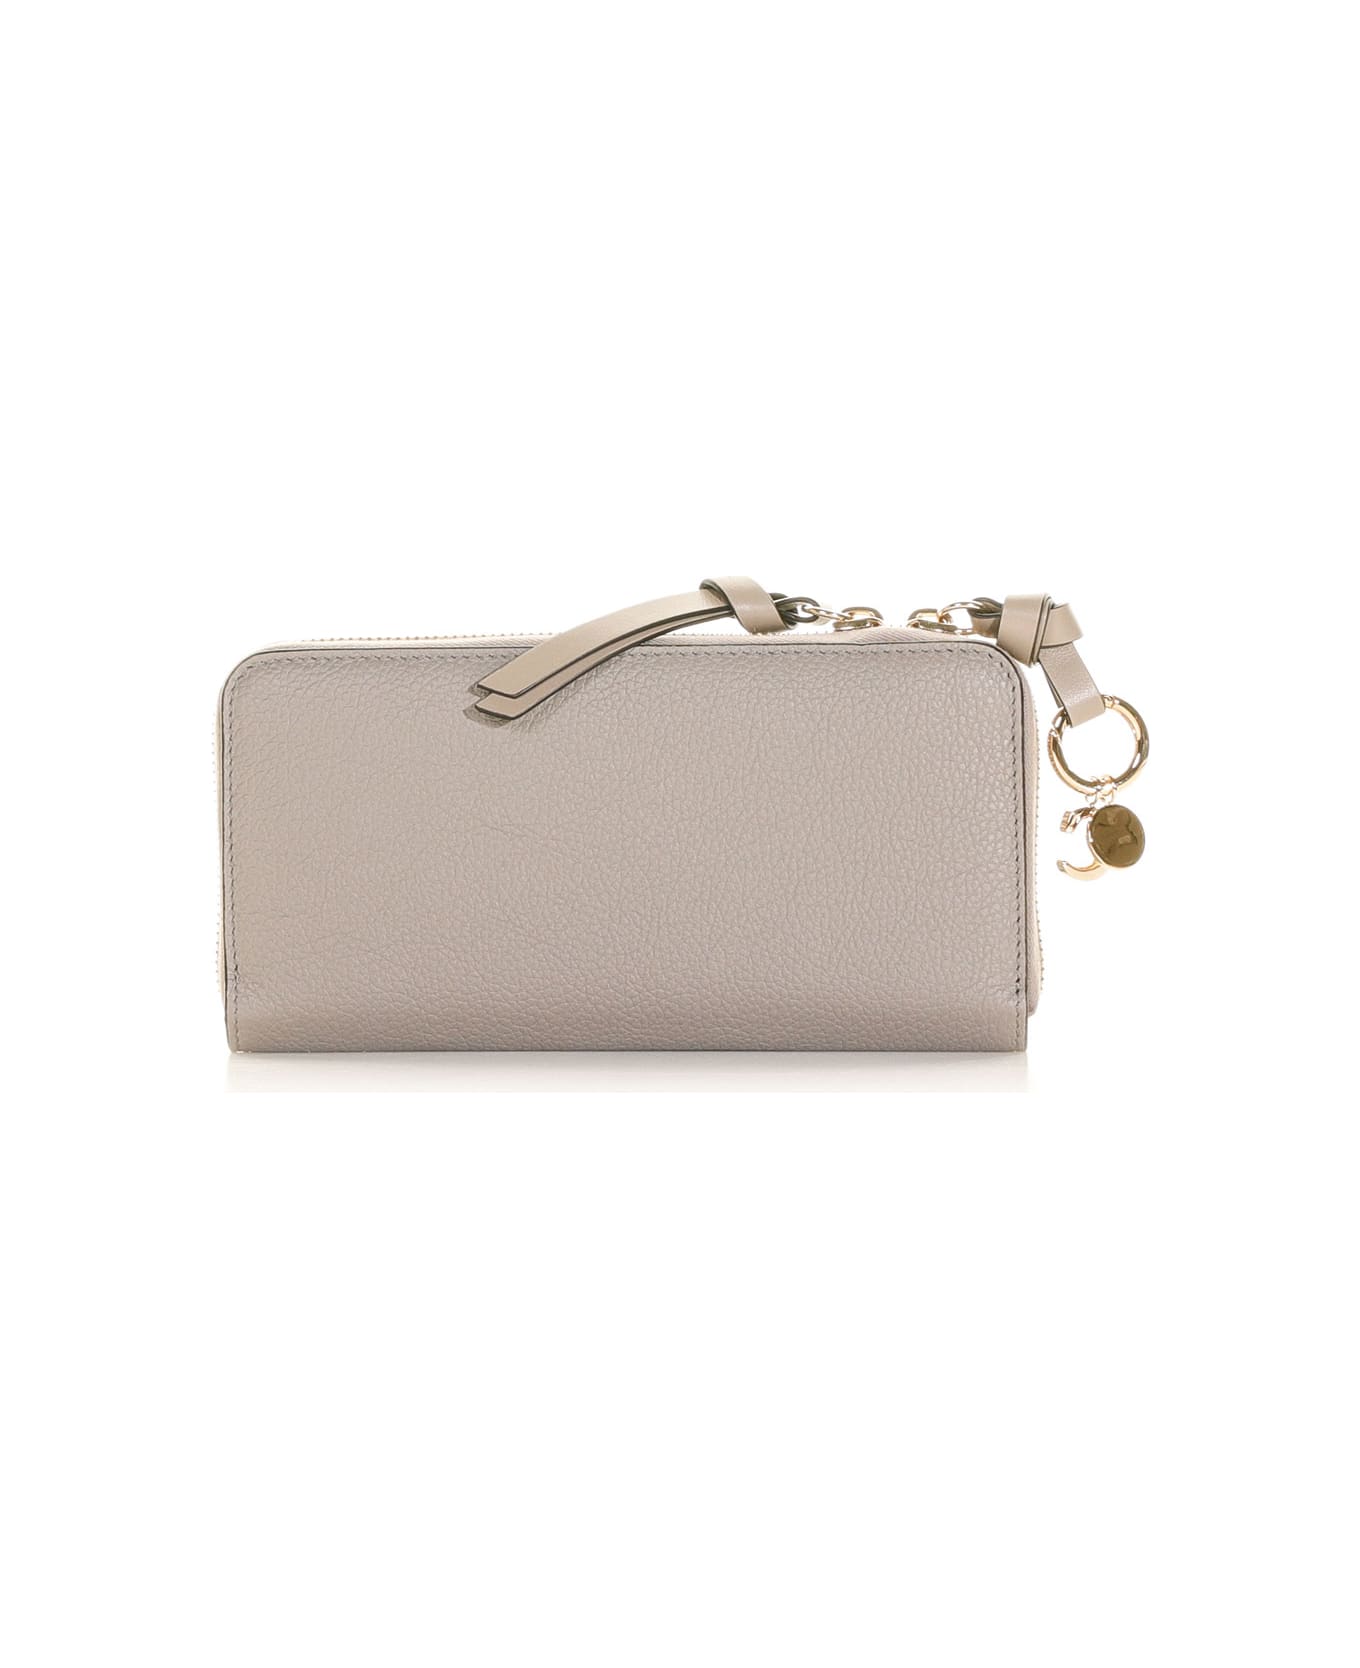 Chloé Full Zip Leather Wallet - CASHMERE GREY 財布